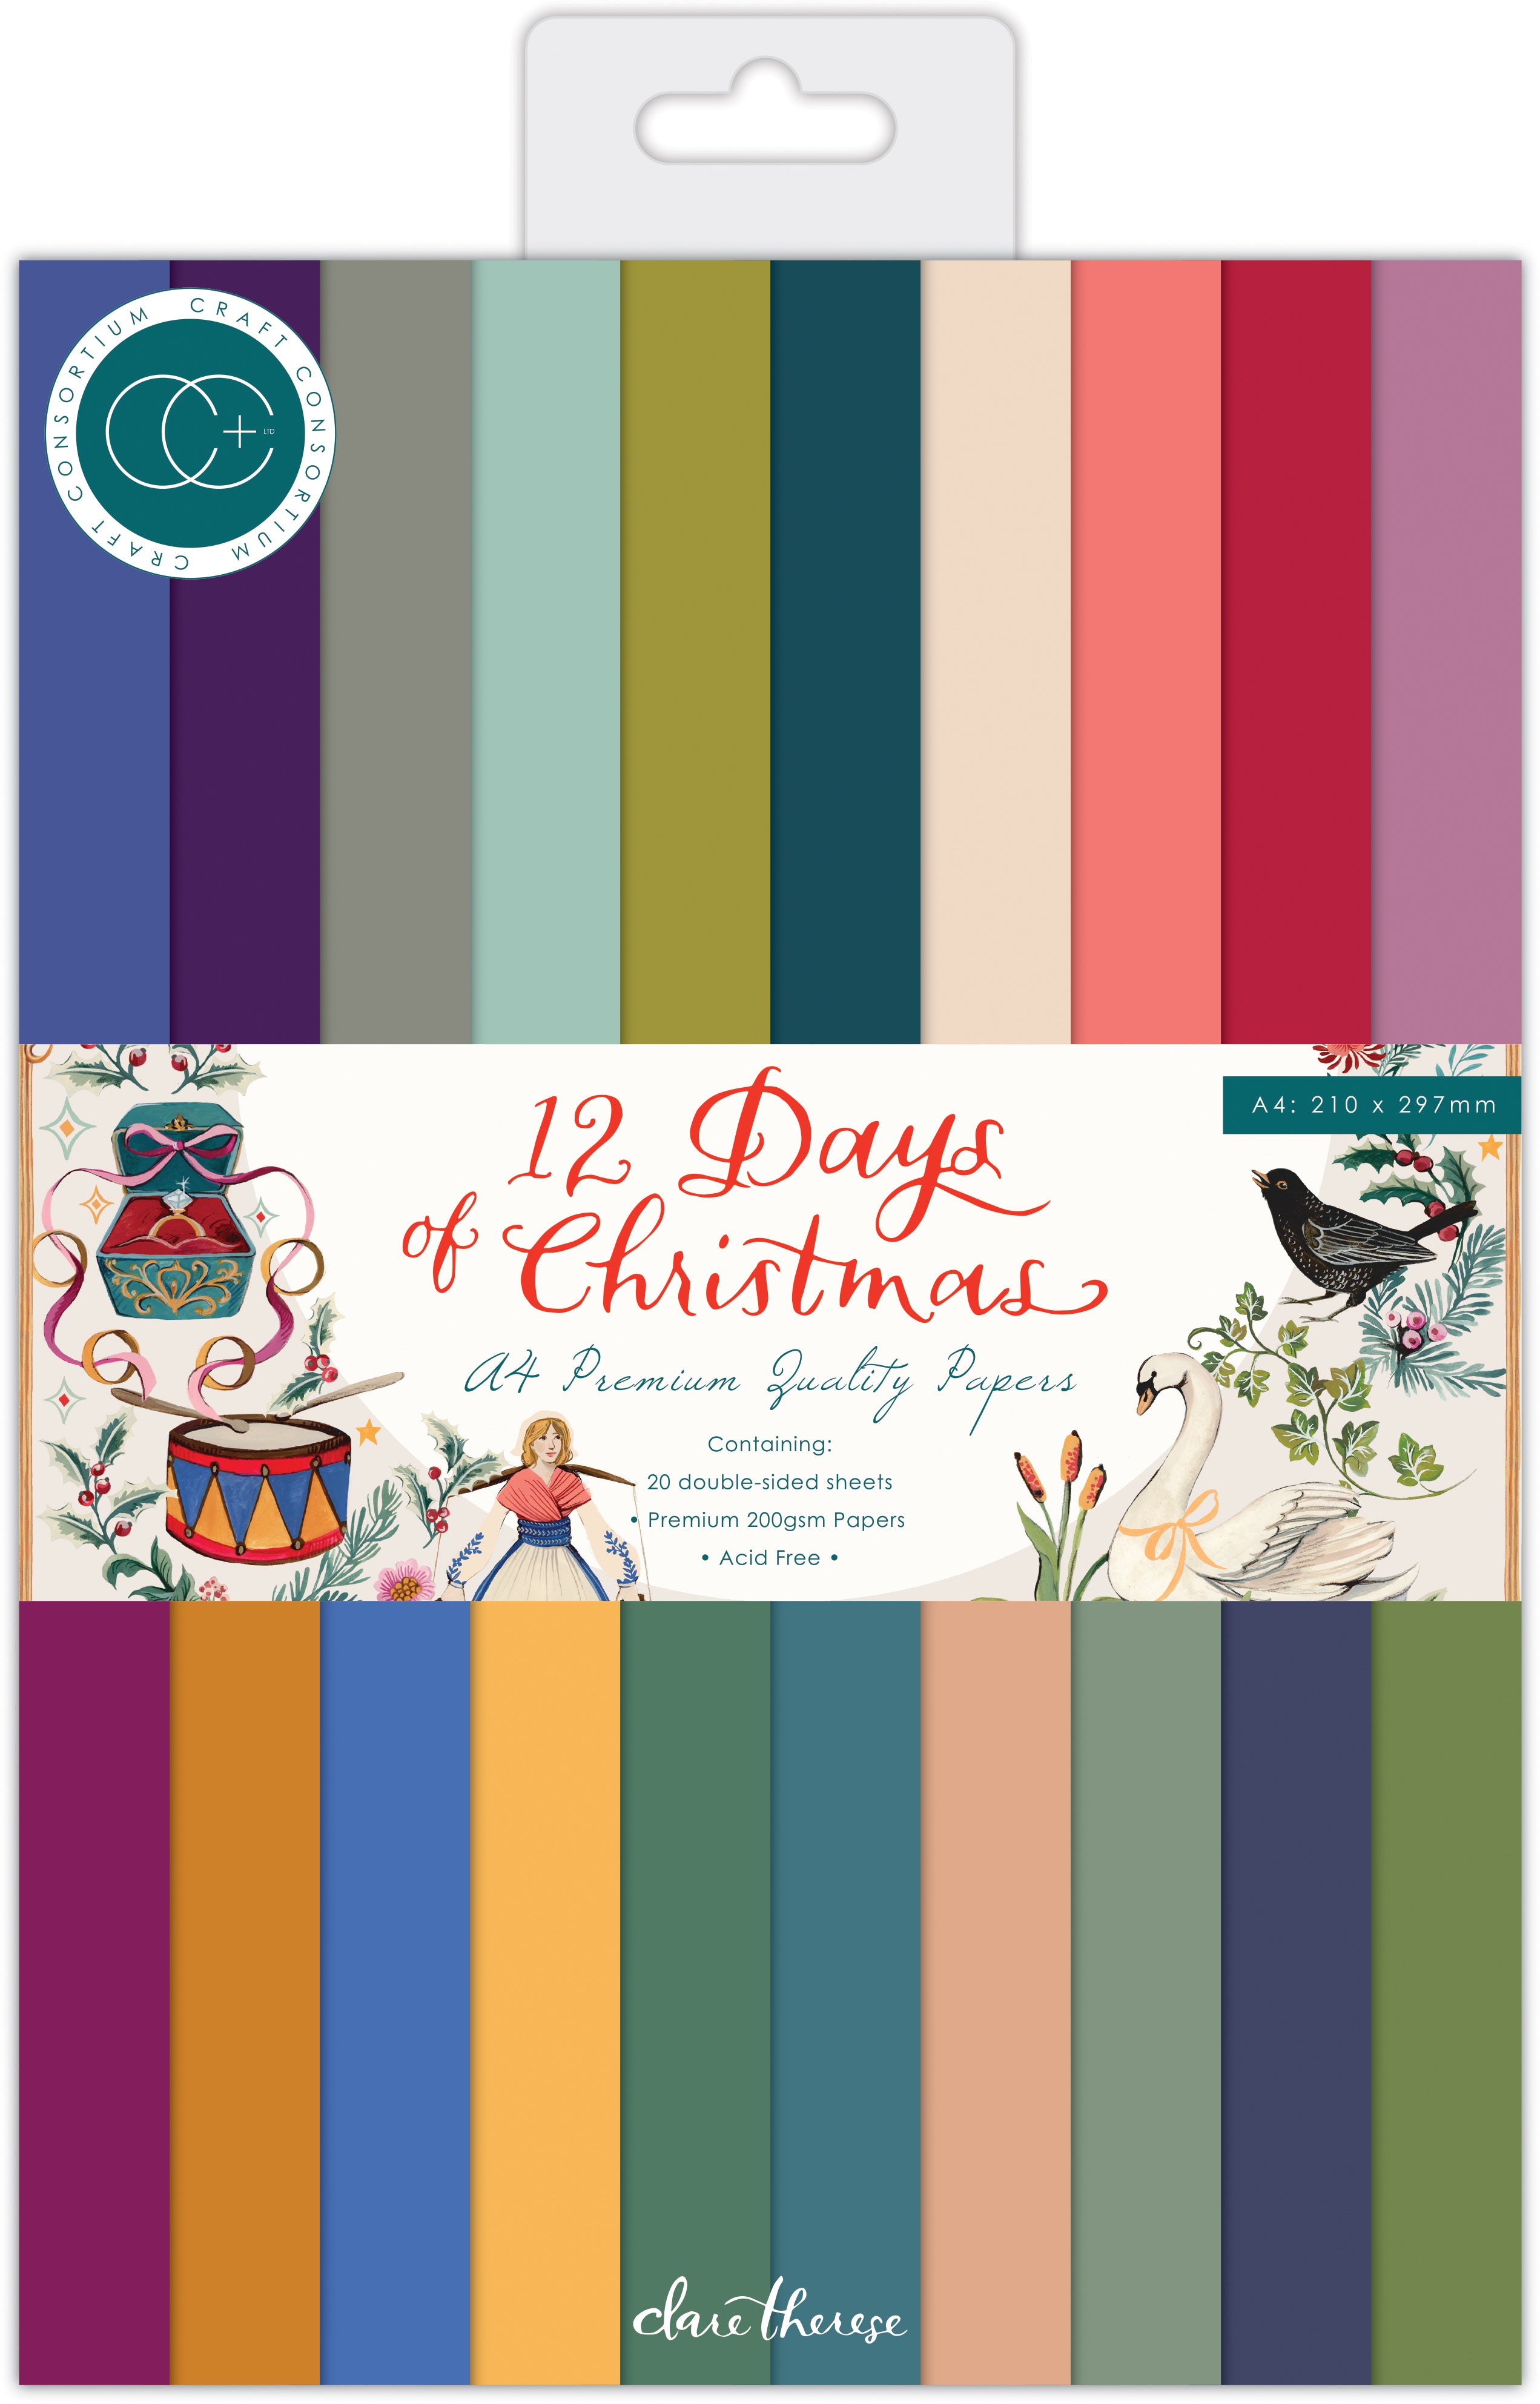 Craft Consortium 12 Days Of Christmas - A4 Paper Pad